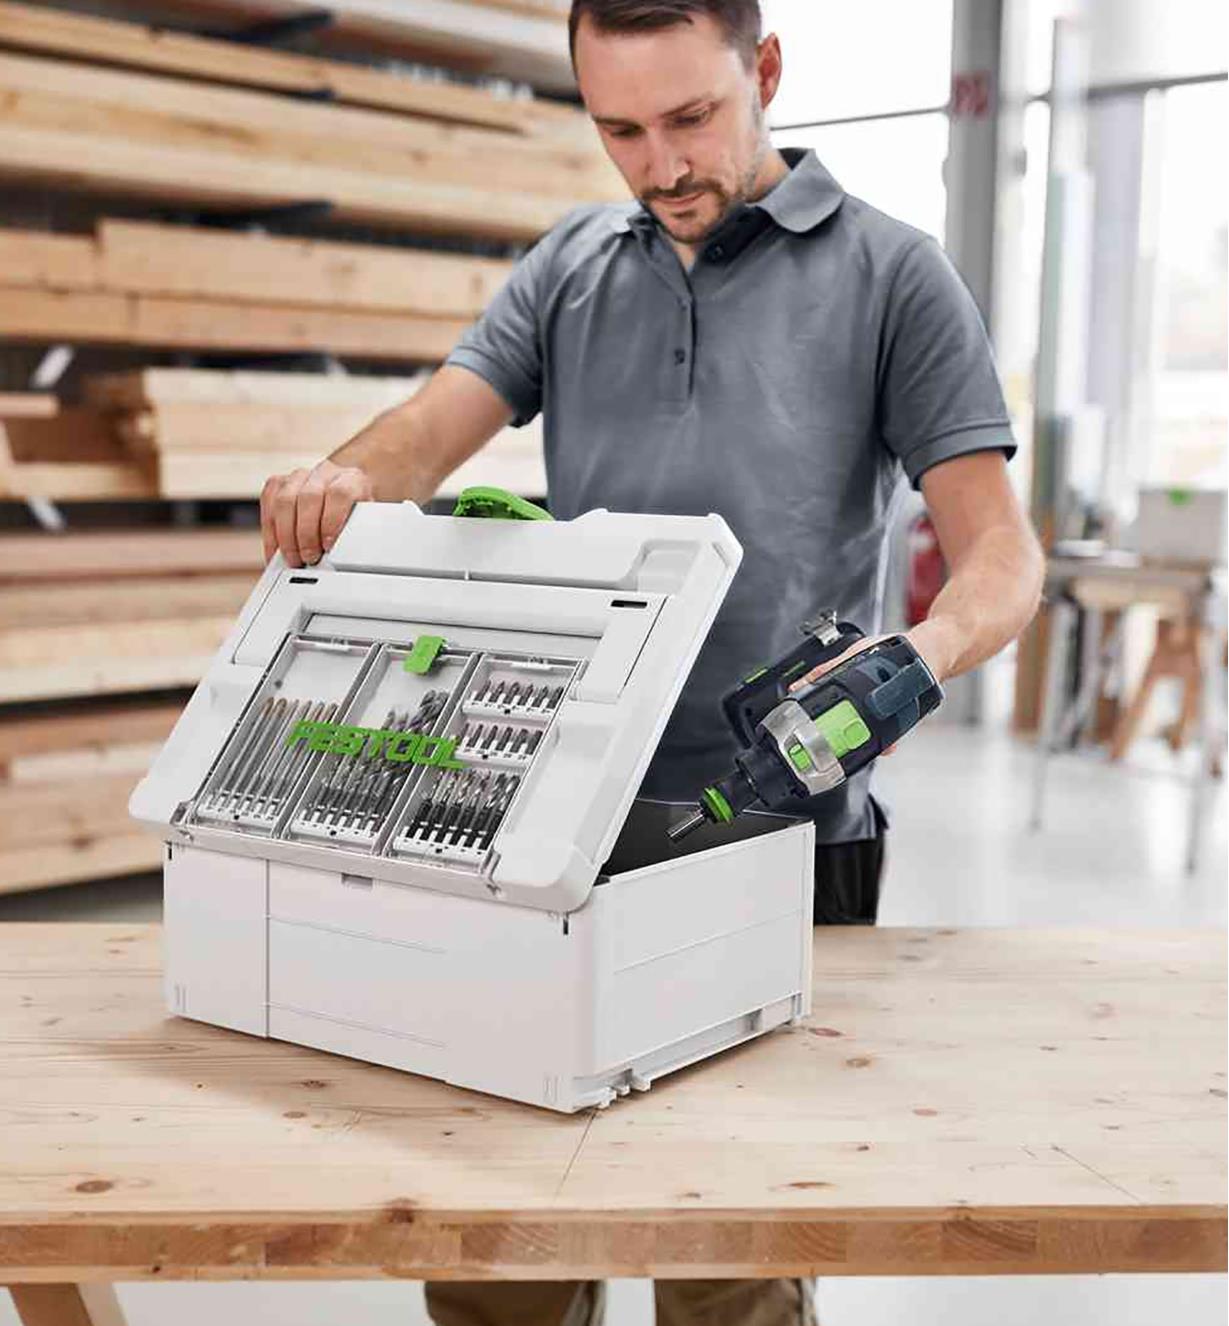 ZA577348 - Festool Systainer³ SYS3 M237